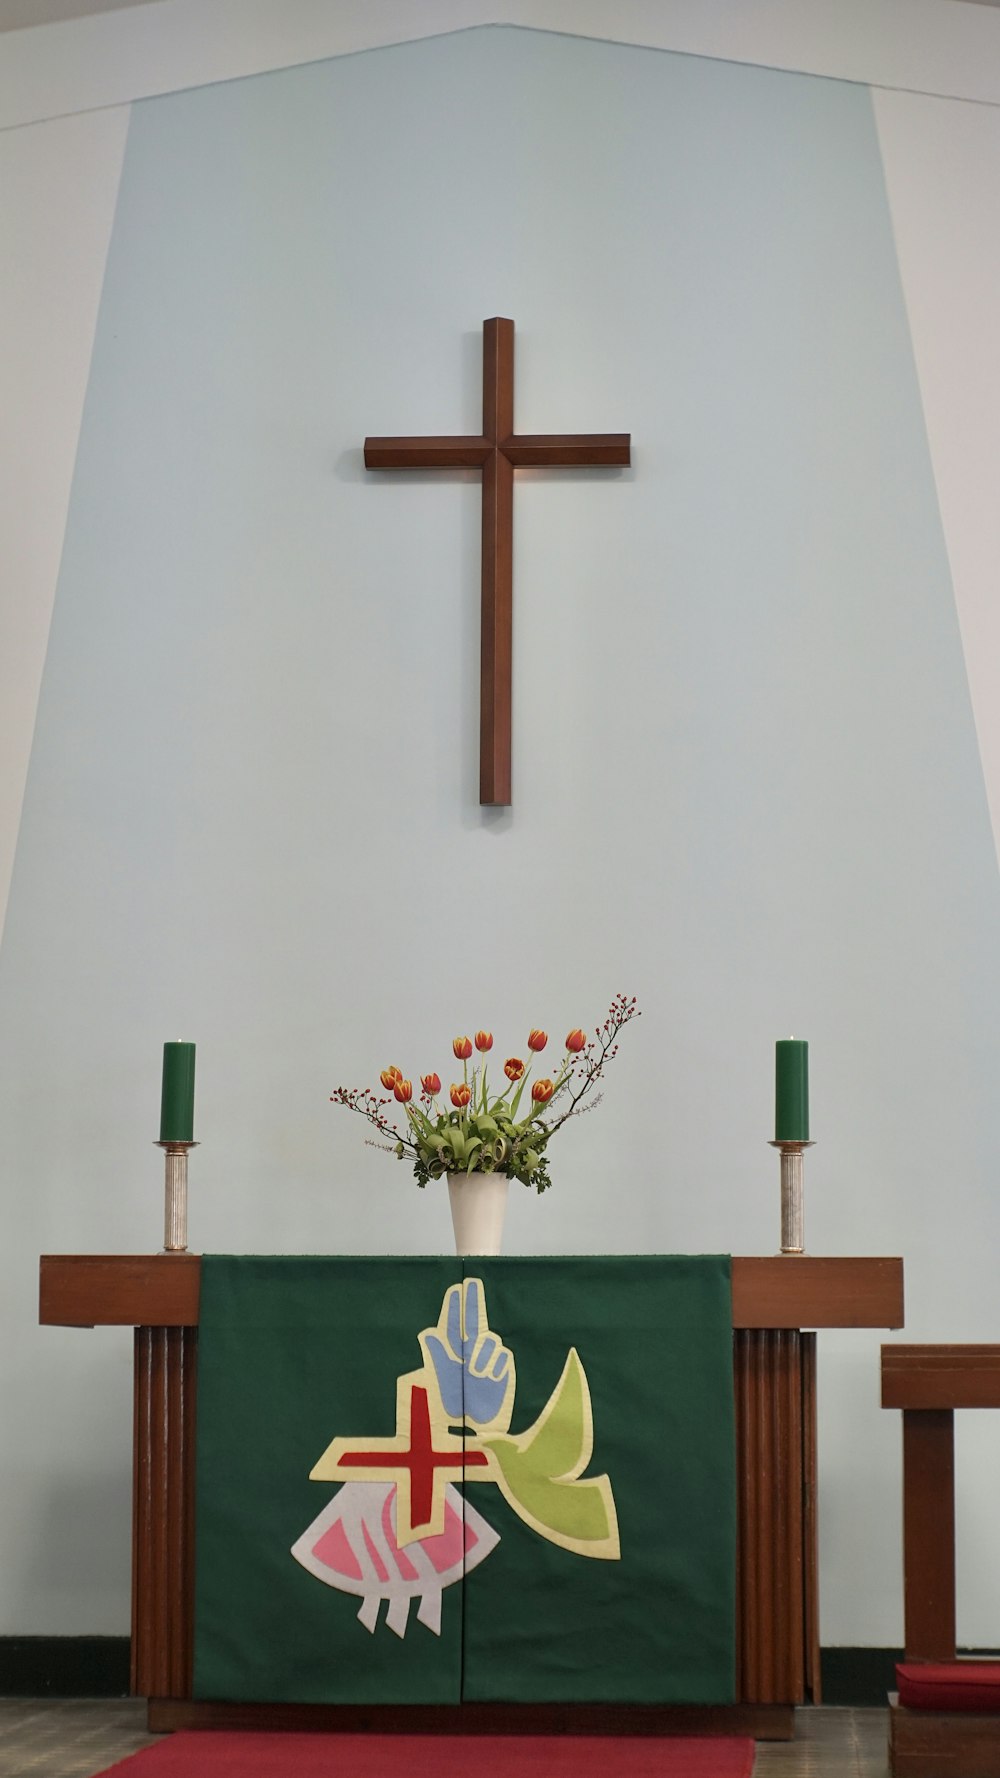 Church Altar Pictures | Download Free Images on Unsplash